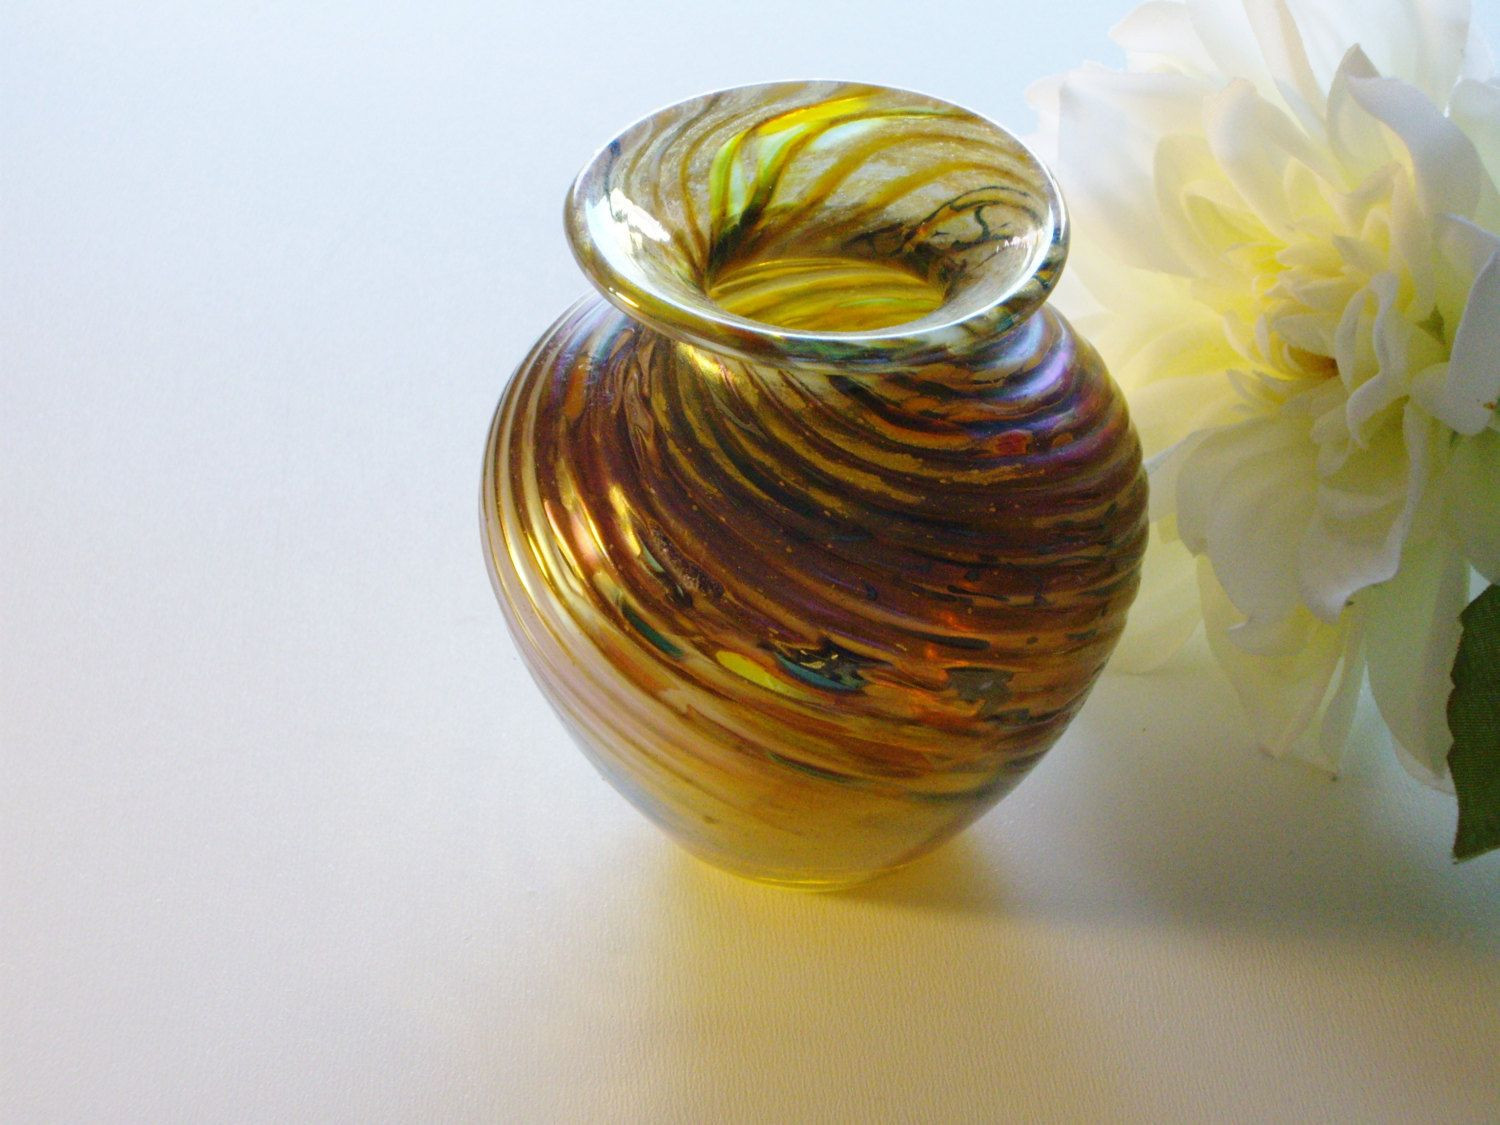 12 attractive Gold Striped Vase 2024 free download gold striped vase of vintage art glass vase small metallic swirls hand blown gold by inside vintage art glass vase small metallic swirls hand blown gold by vintagerous on etsy